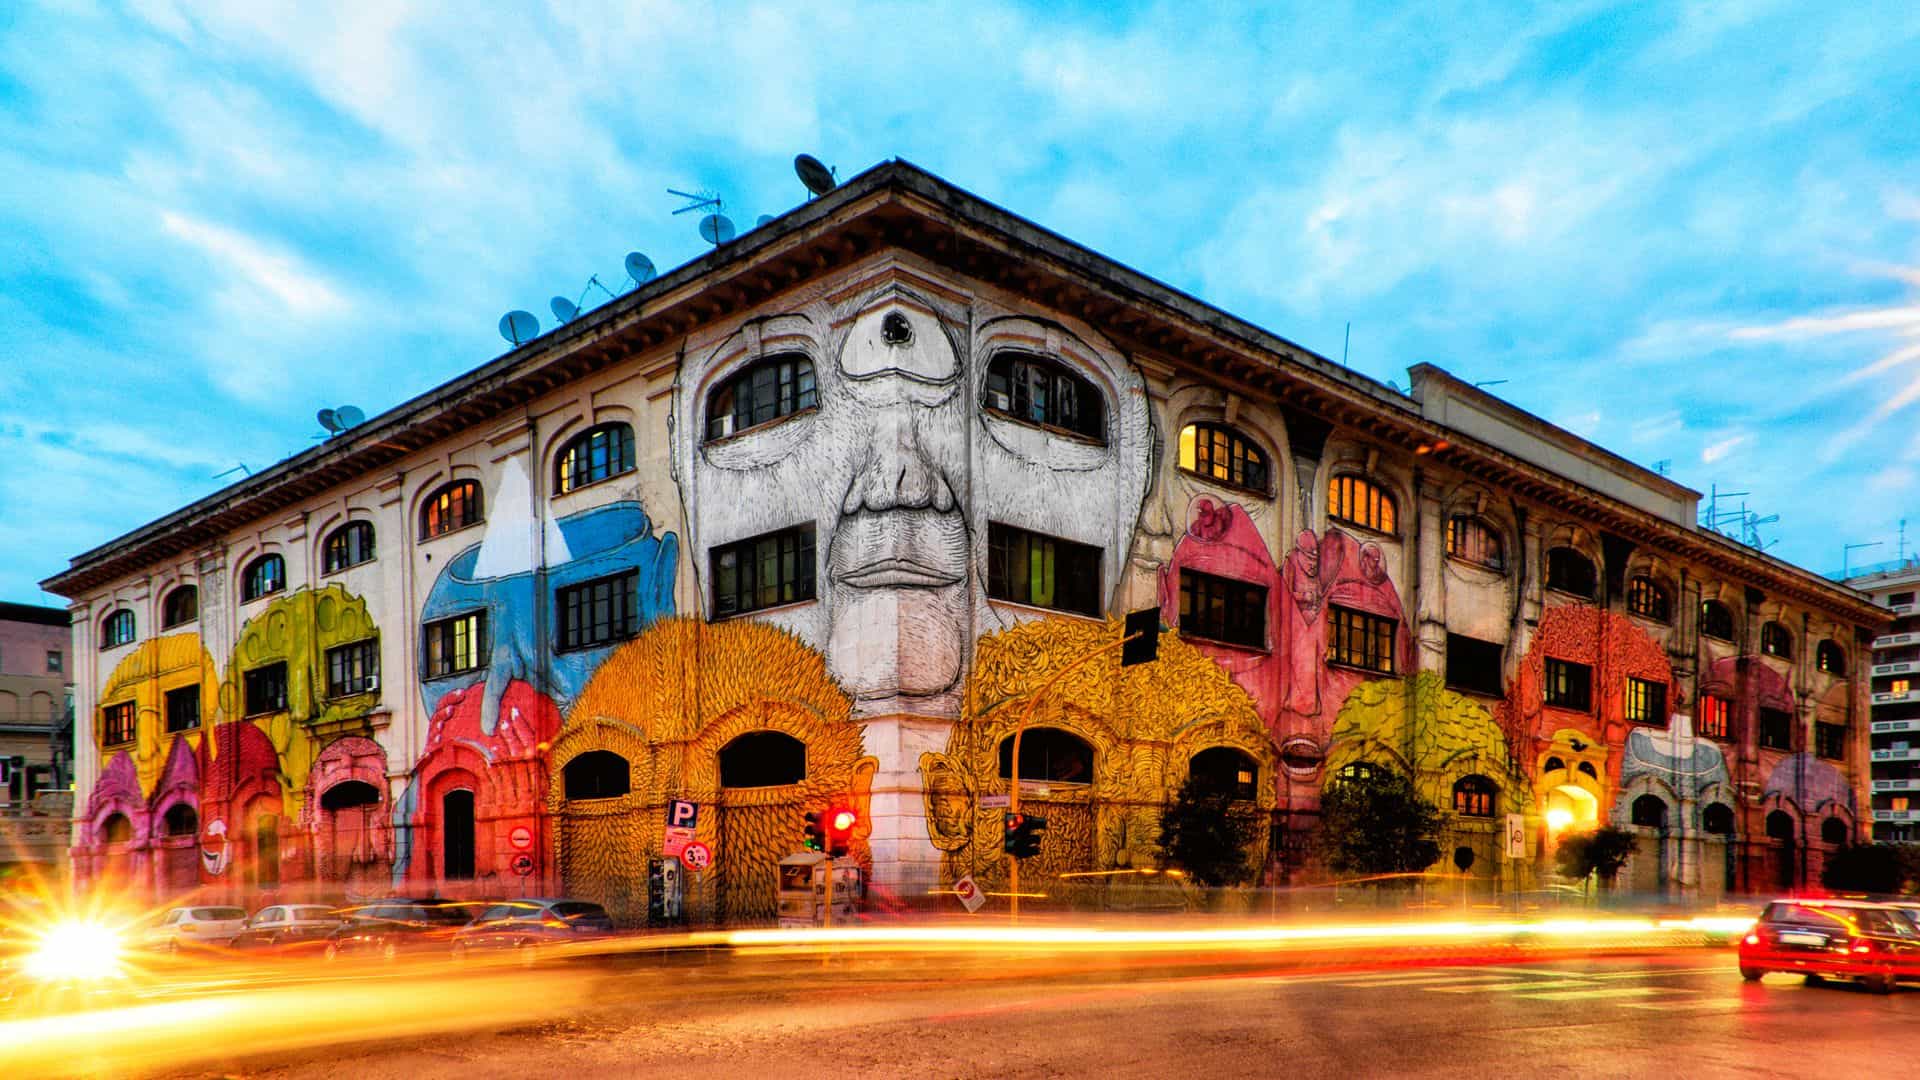 Cars pass by a building in Ostiense covered in street art.